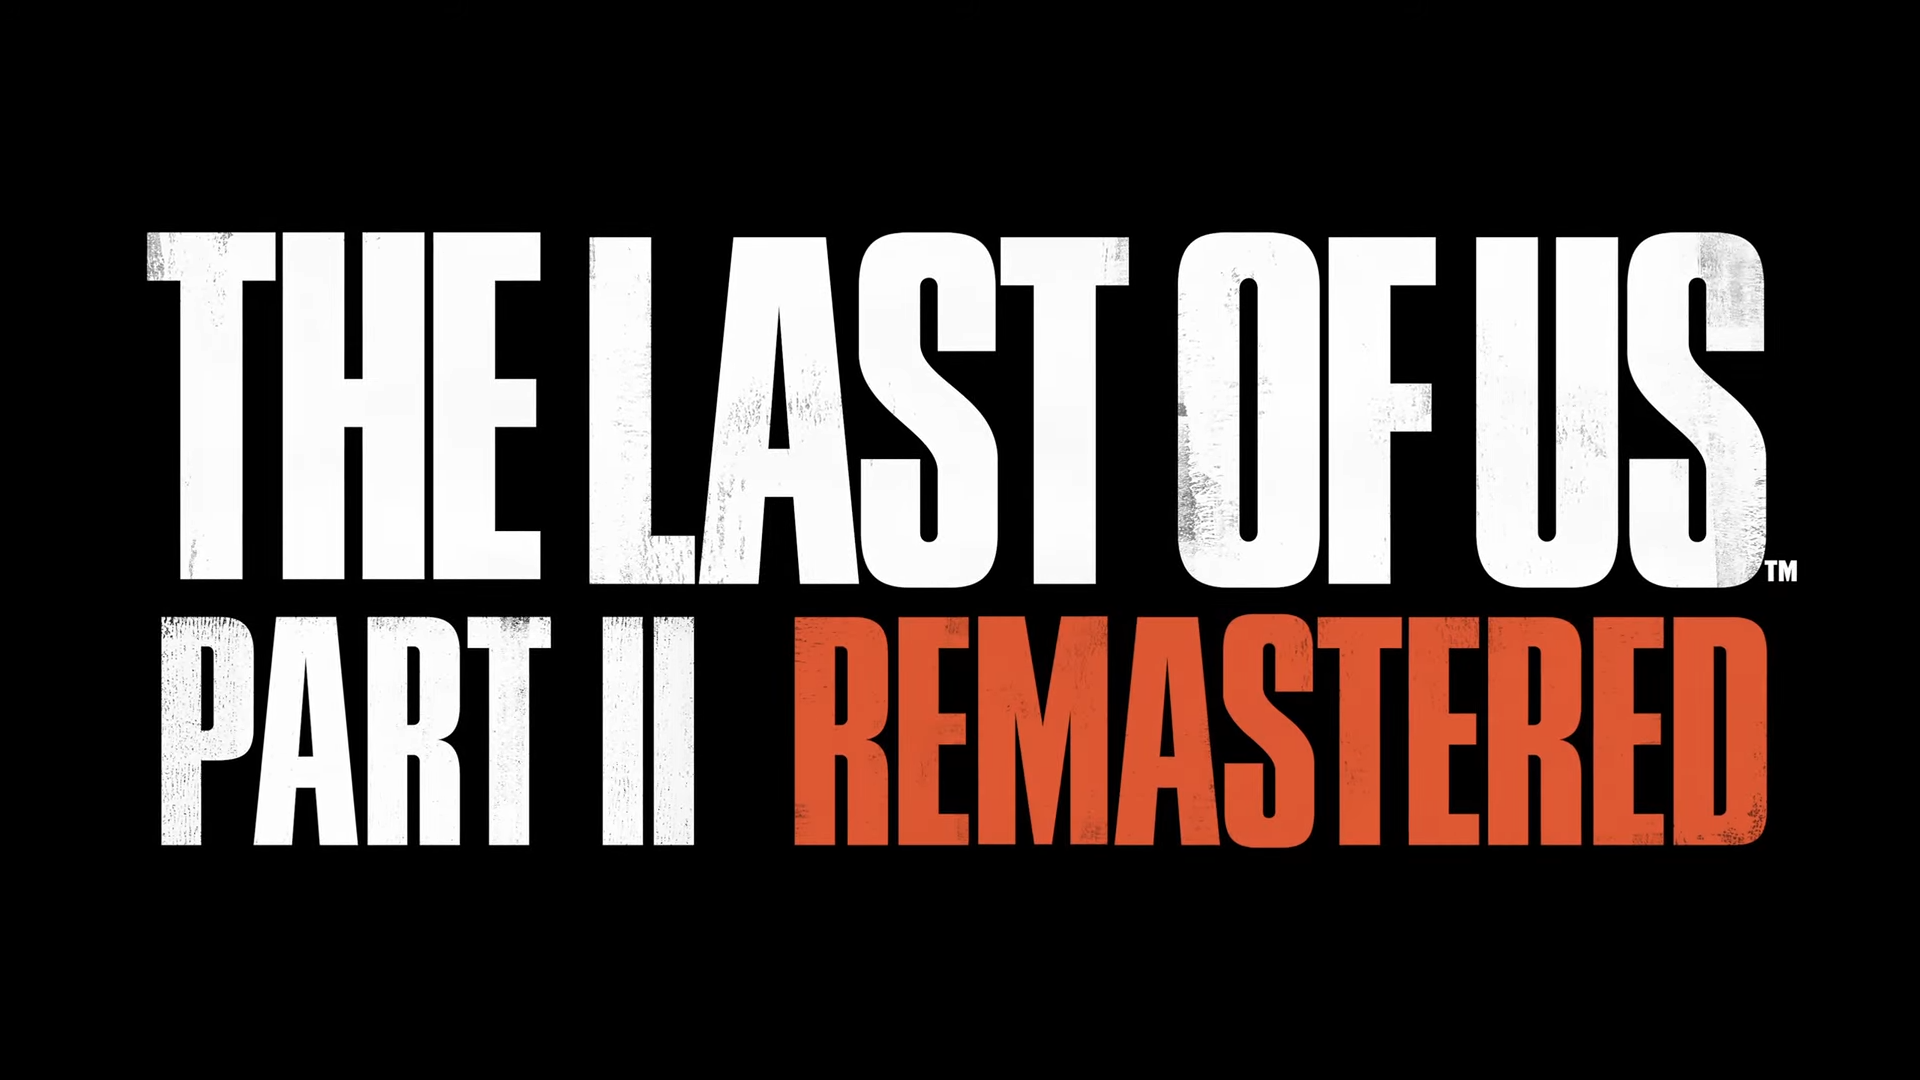 It's official: The Last of Us Part II Remastered will be released on  January 19 on PlayStation 5, PS4 owners will be able to update for $10